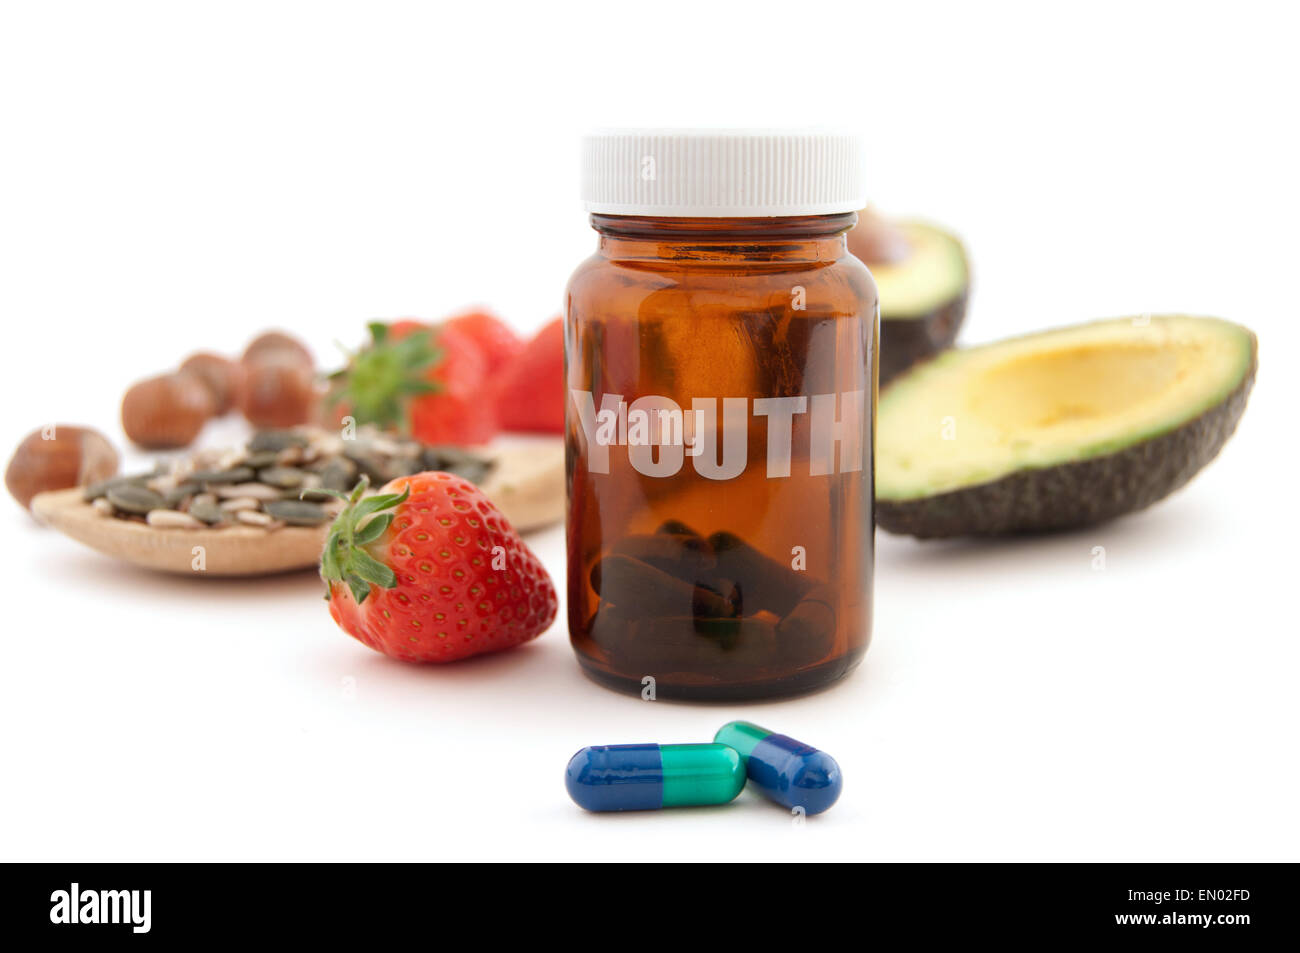 Anti-aging pills surrounded by nutritious superfoods including avocado, pumpkin seeds and berries Stock Photo